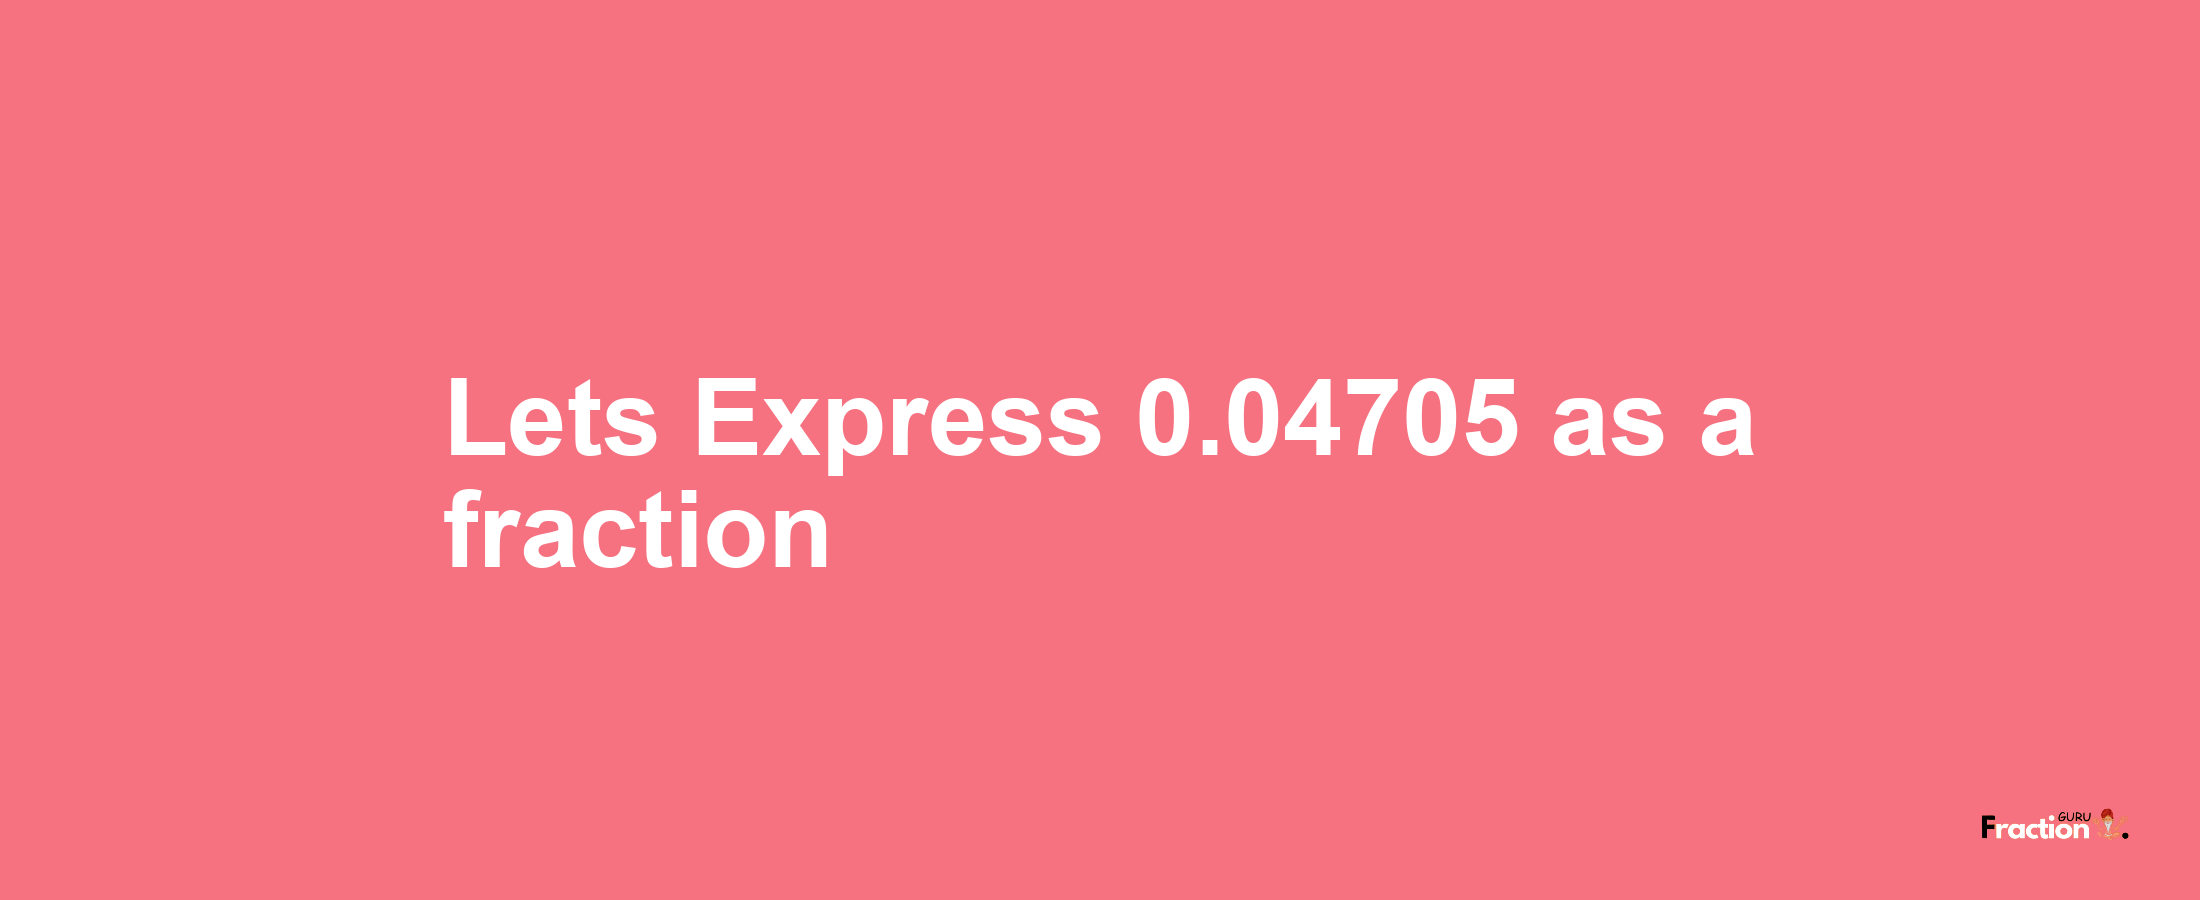 Lets Express 0.04705 as afraction